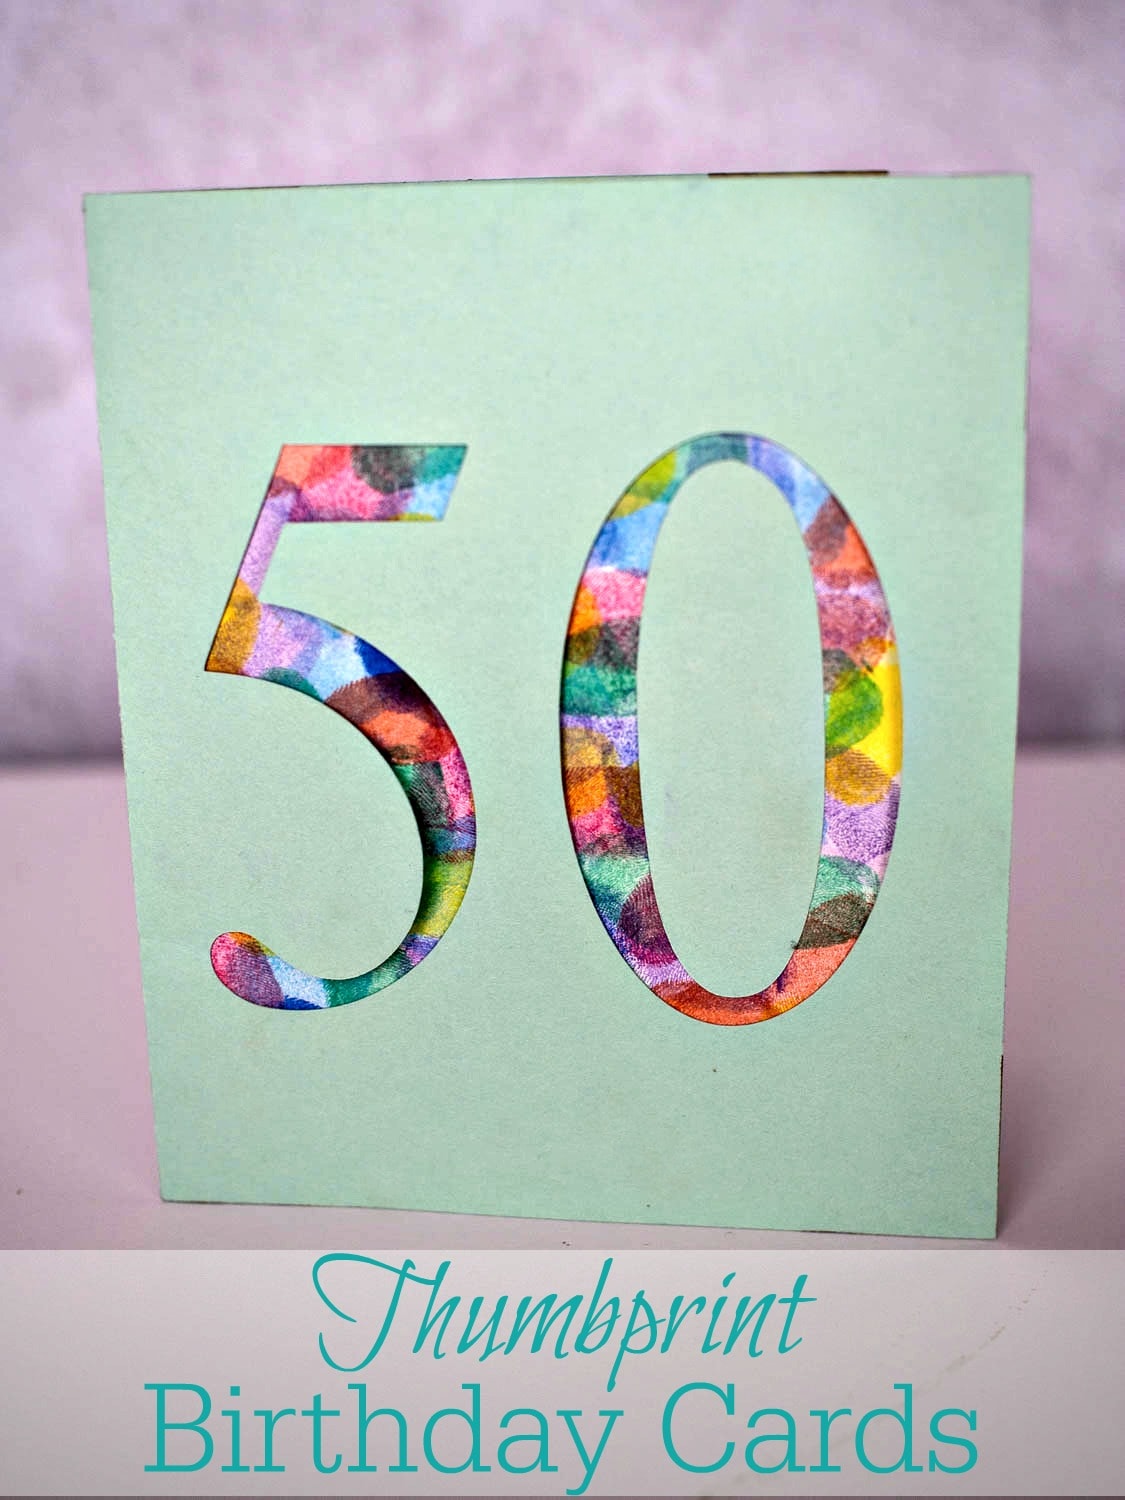 Thumbprint Birthday Cards - These cute cards are made by cutting out numbers and decorating the cut outs with thumbprints.  A cute way to personalize a card!